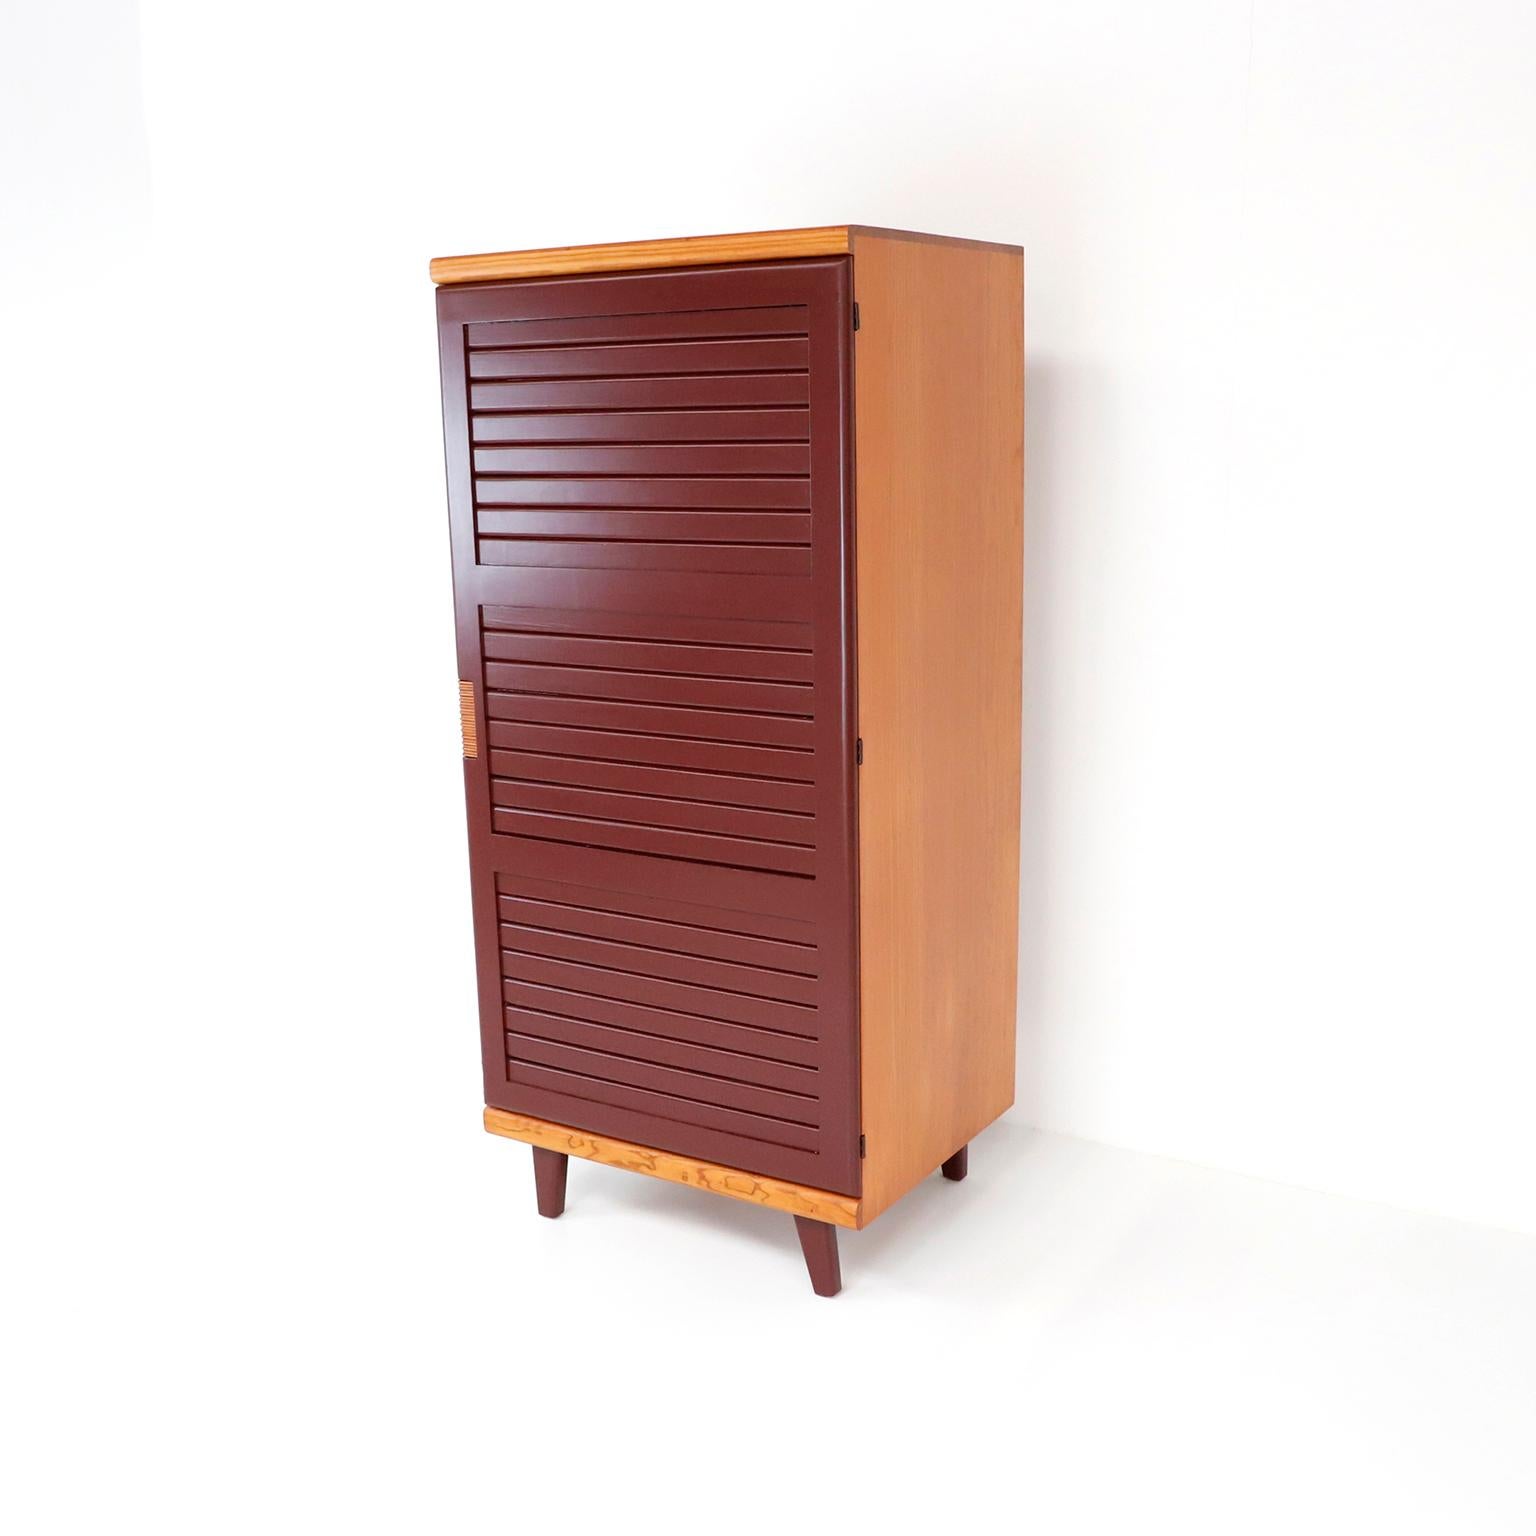 We offer this rare and Original Wardrobe designed by Michael Van Beuren for the 